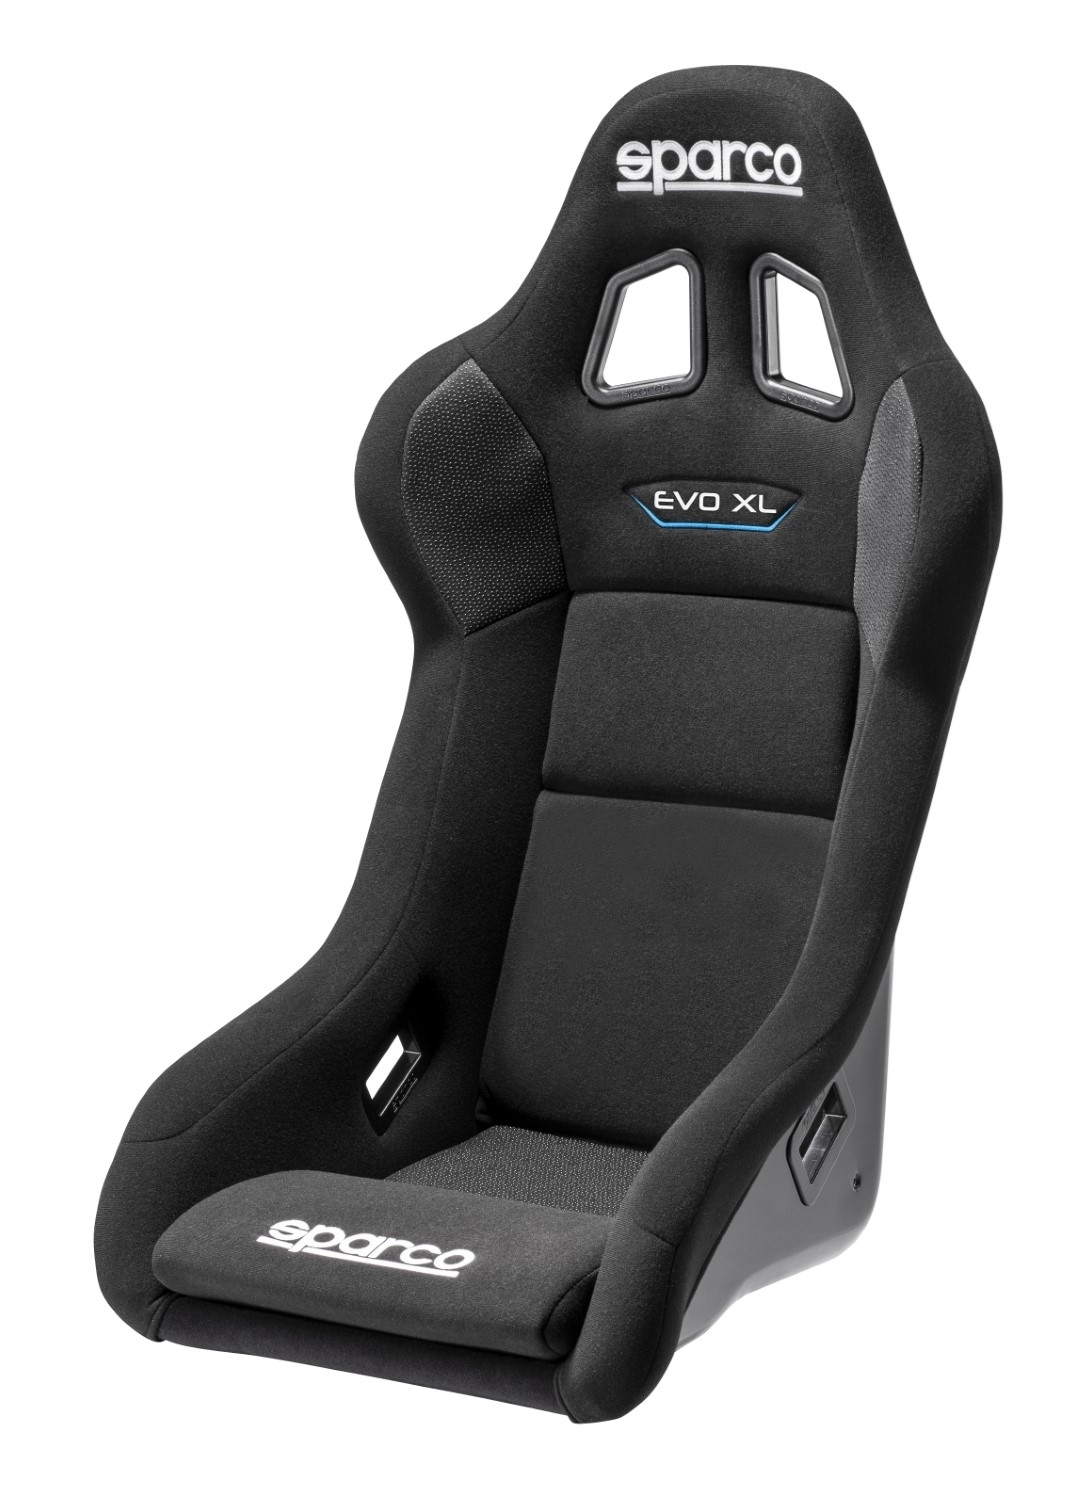 Sparco EVO QRT XL Competition Racing Seat, Corvette, Camaro, Mustang Fitment